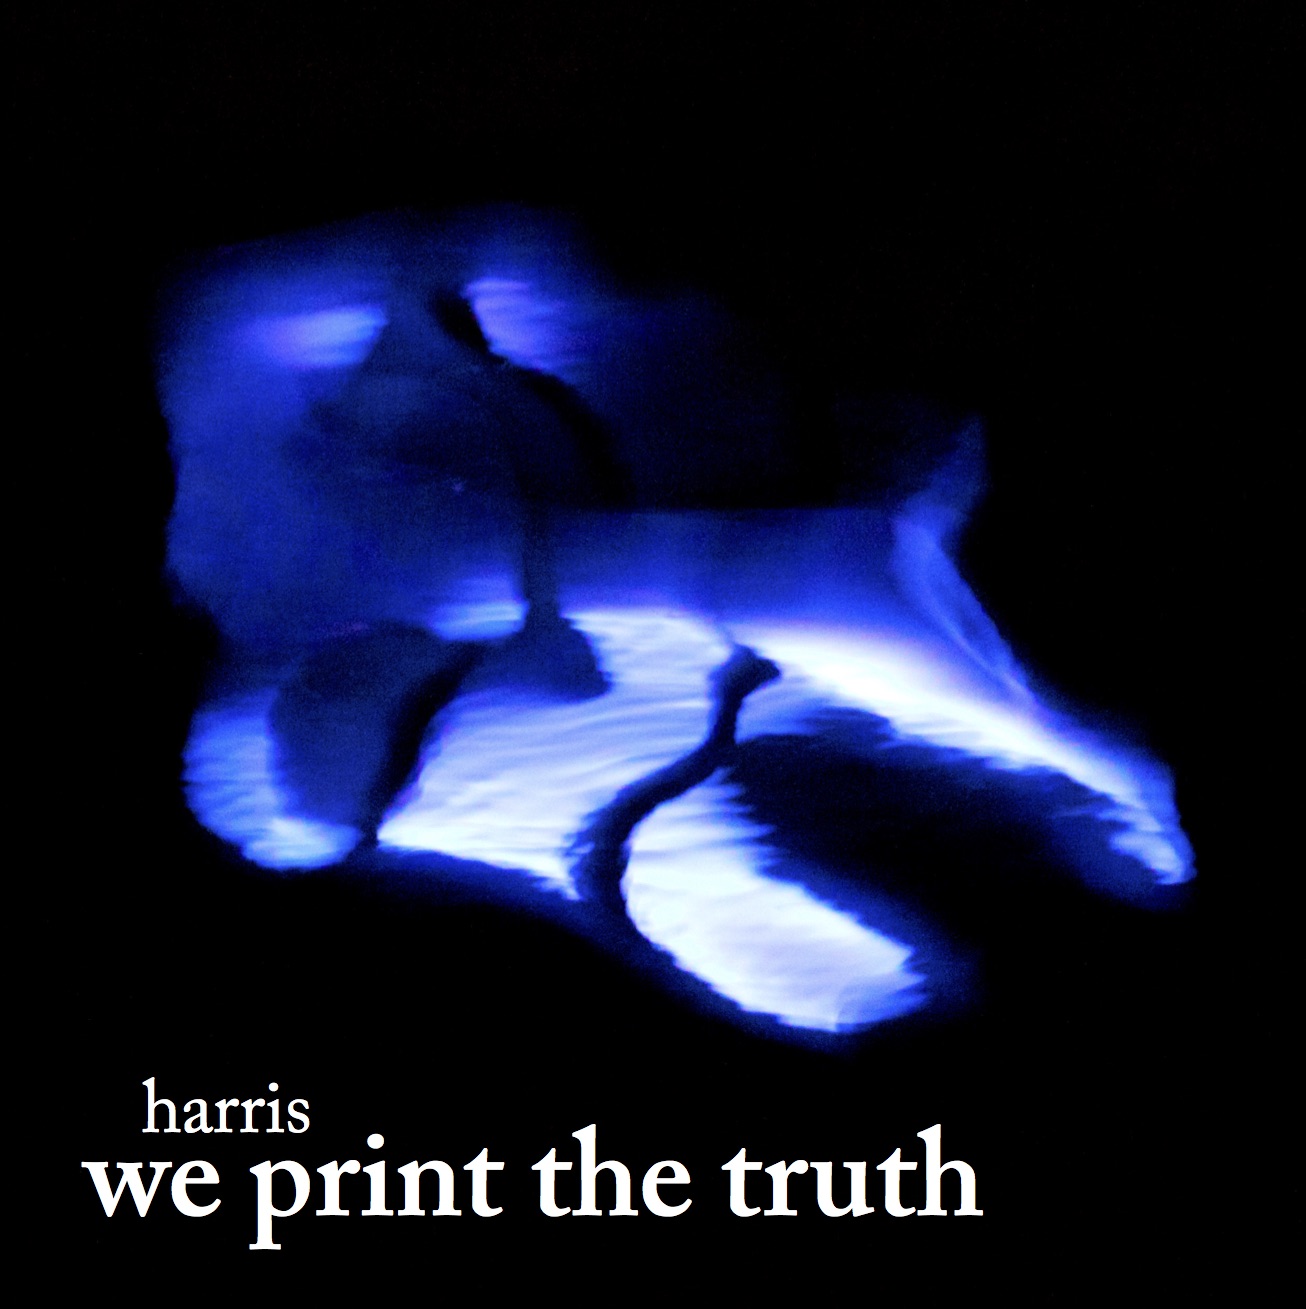 image: we print the truth